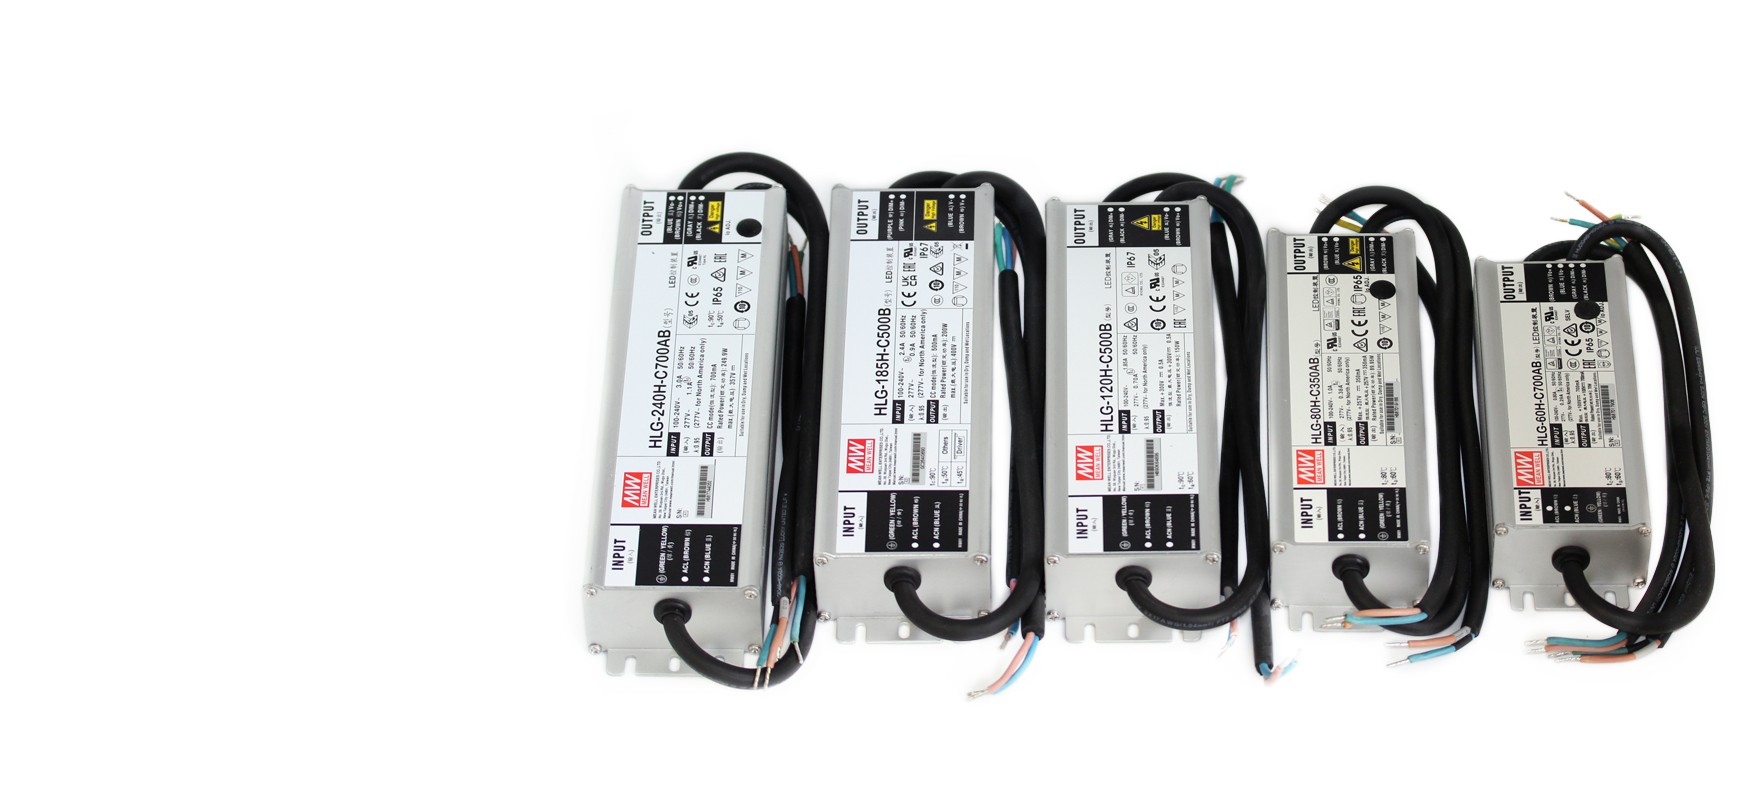 Mean Well LED driver series HLG-240H-C